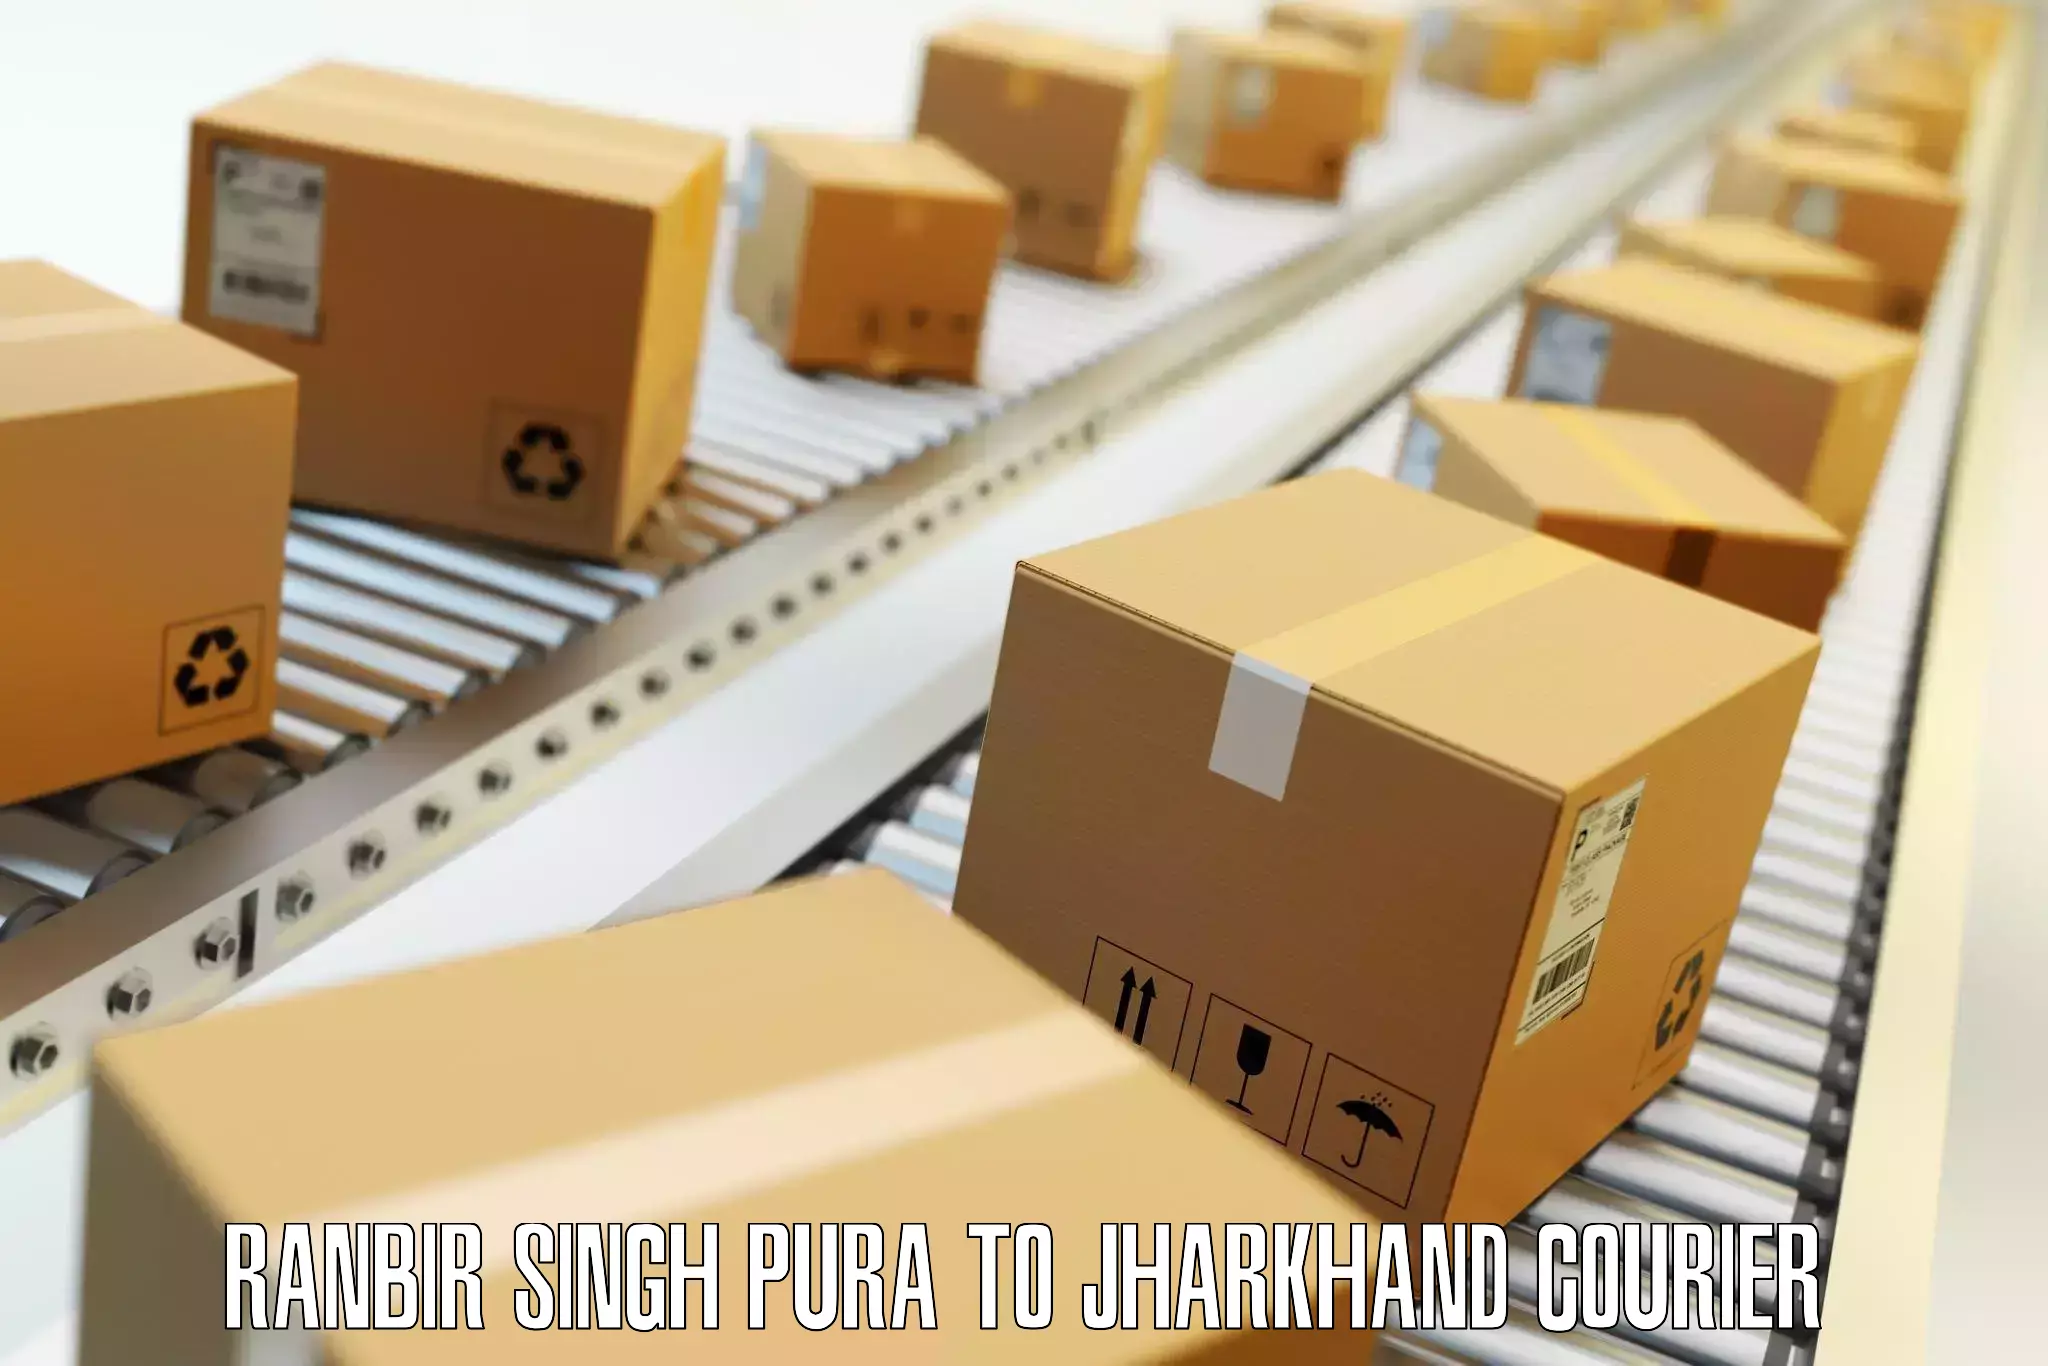 Luggage shipping specialists Ranbir Singh Pura to Jharkhand